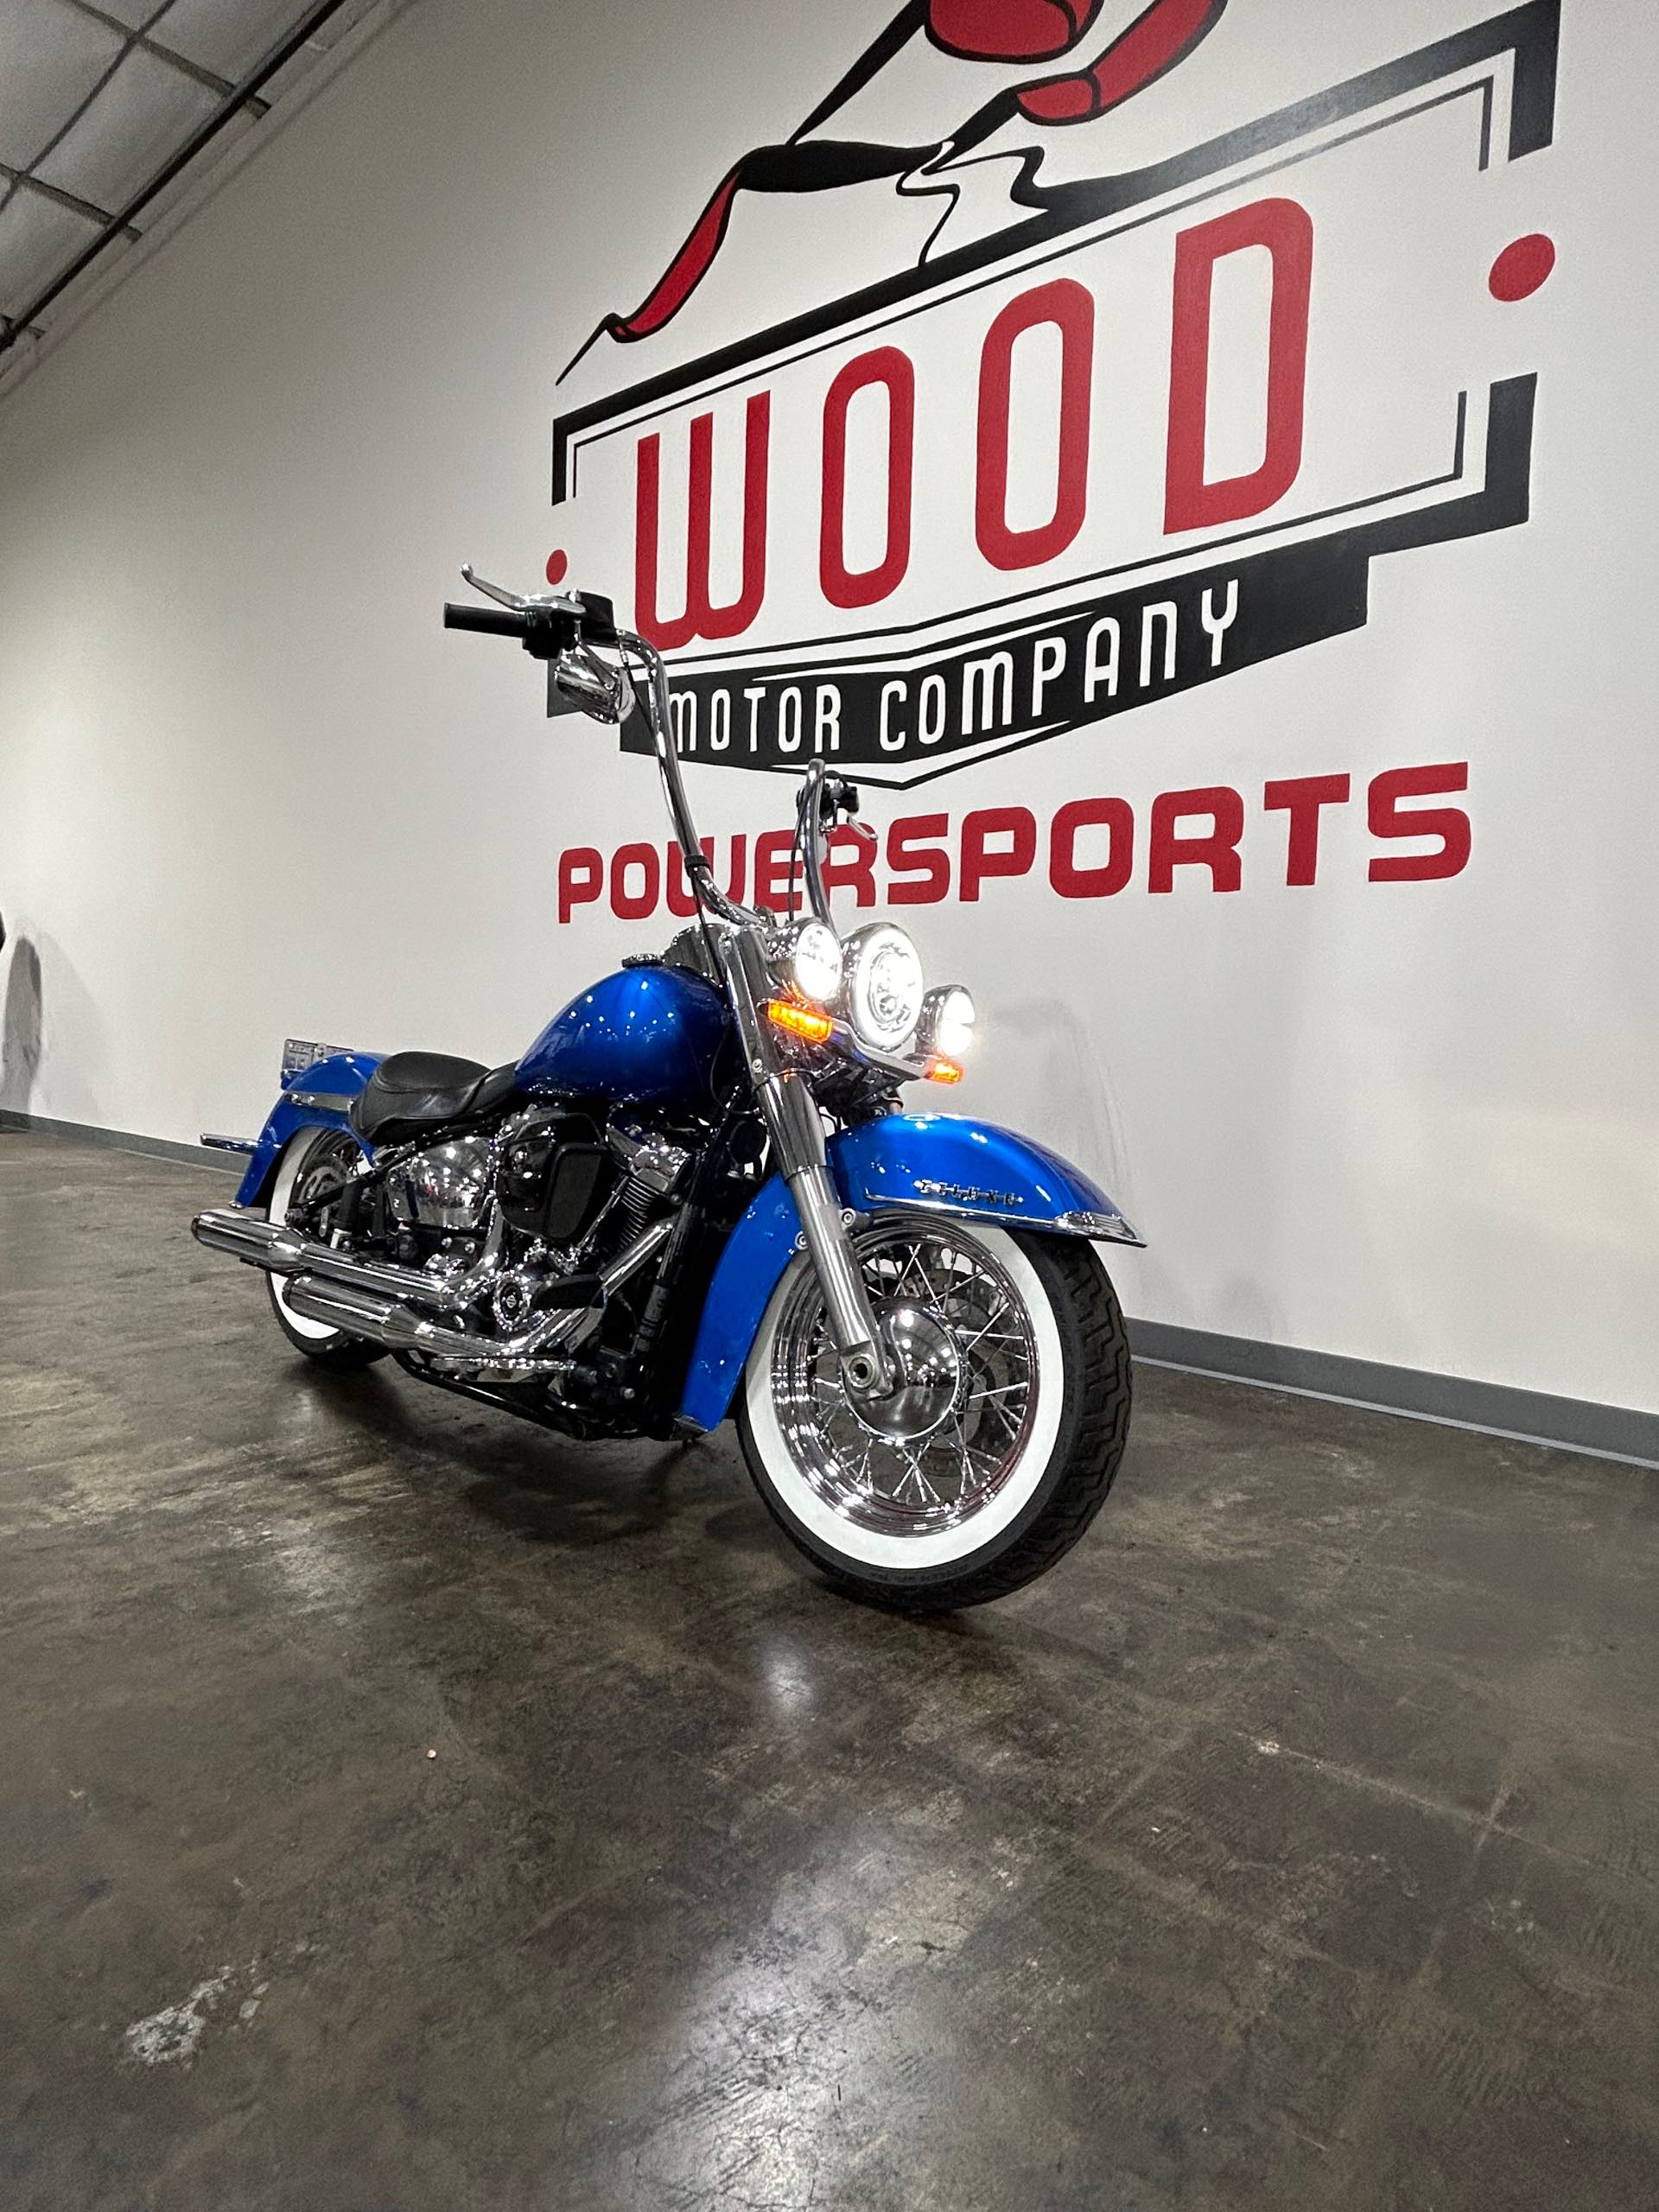 2018 Harley-Davidson Softail Deluxe at Wood Powersports Harrison